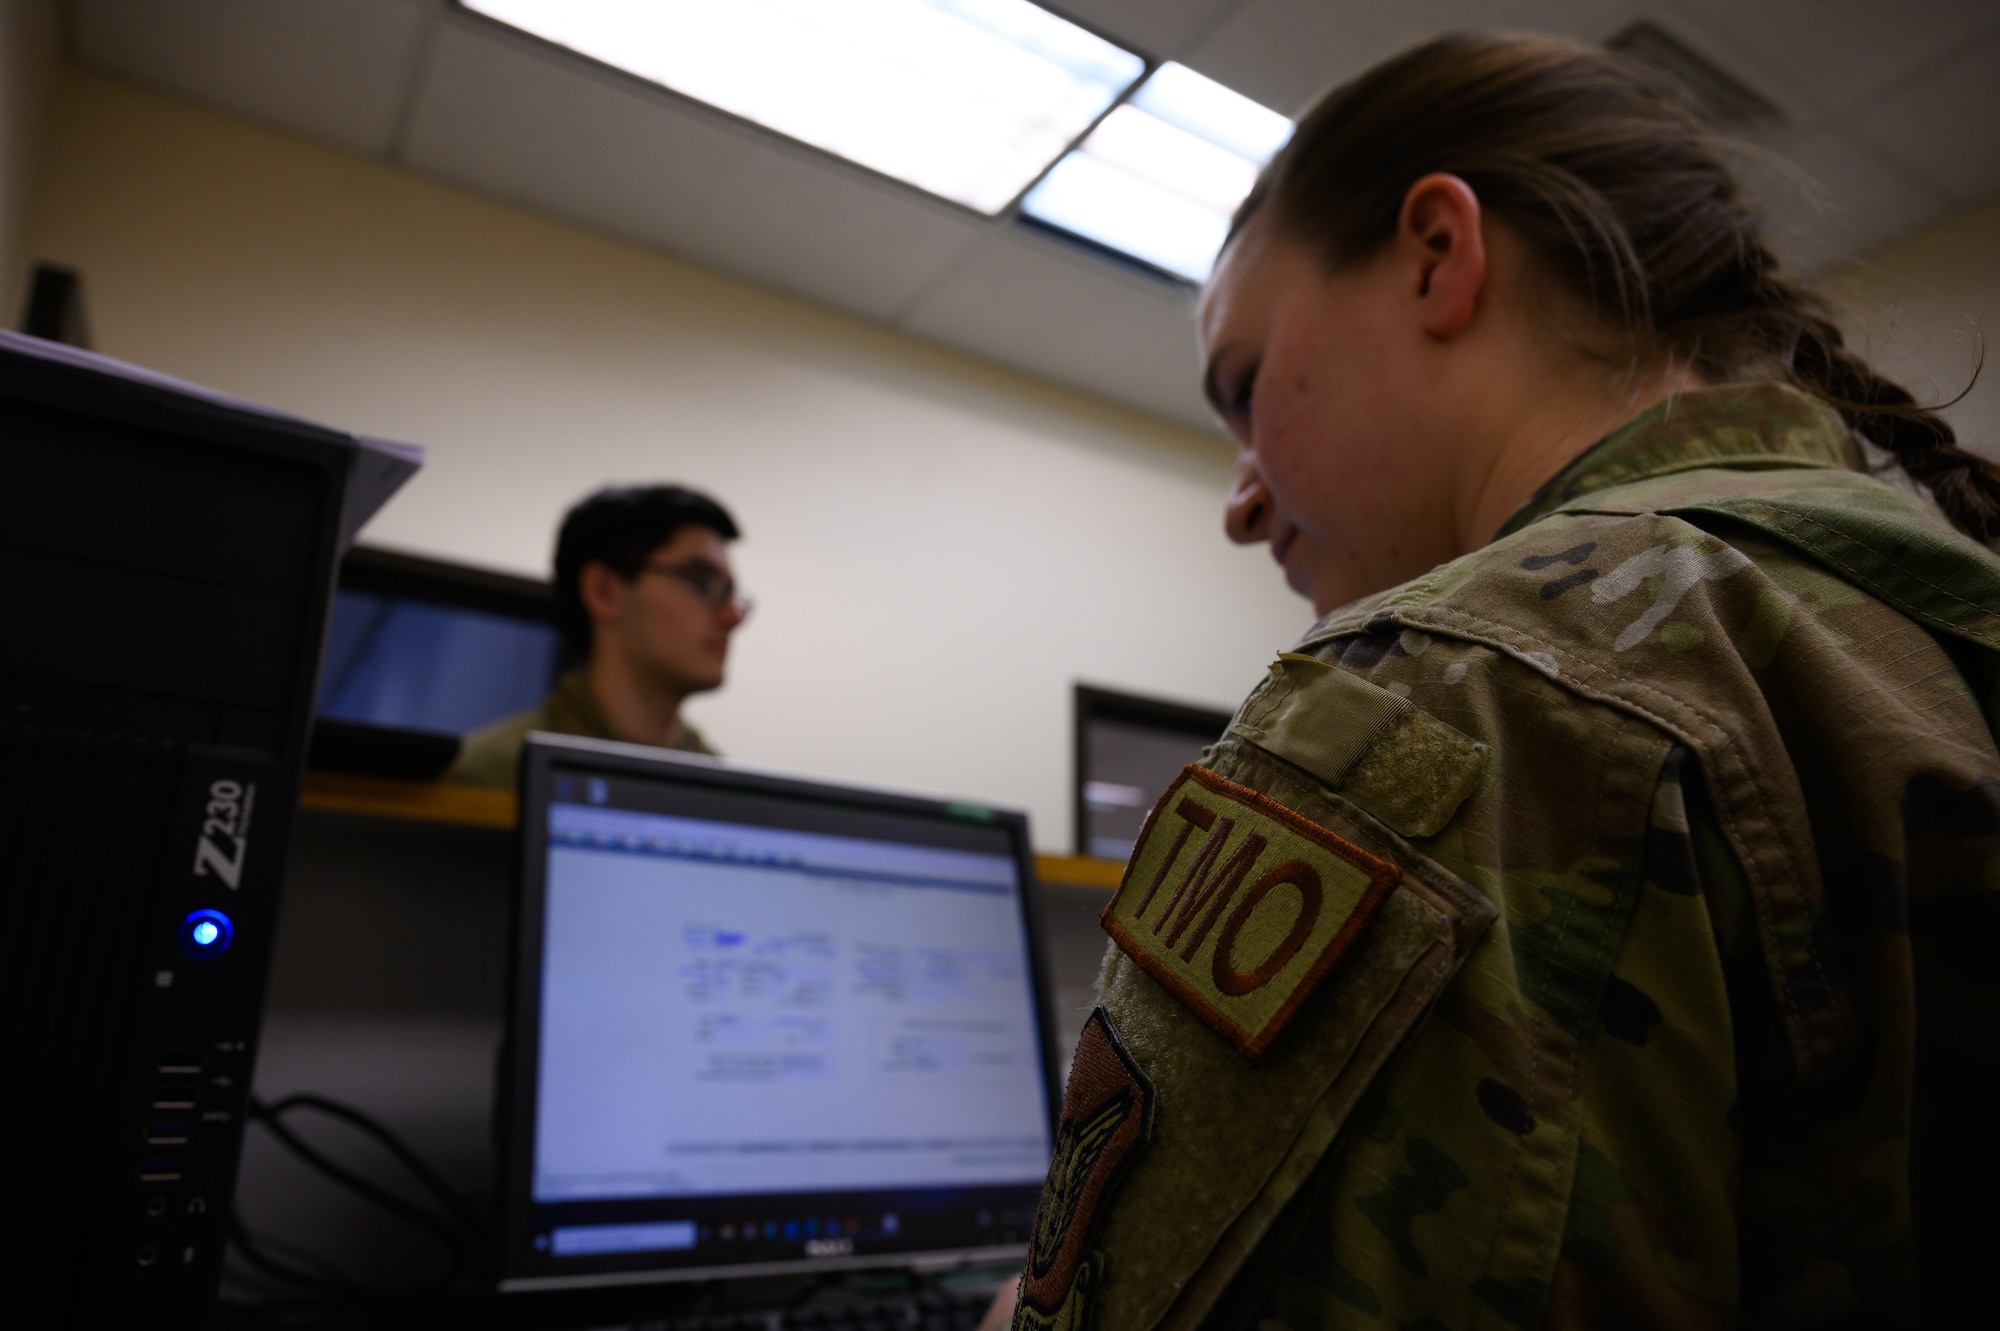 U.S. Air Force Airman 1st Class Hailey Maher, 354th Logistics Readiness Squadron personal property technician, manifests an Airman assigned to the 354th Fighter Wing going through the Personnel Deployment Function line during exercise Arctic Gold 23-1 at Eielson Air Force Base, Alaska, March 7, 2023.